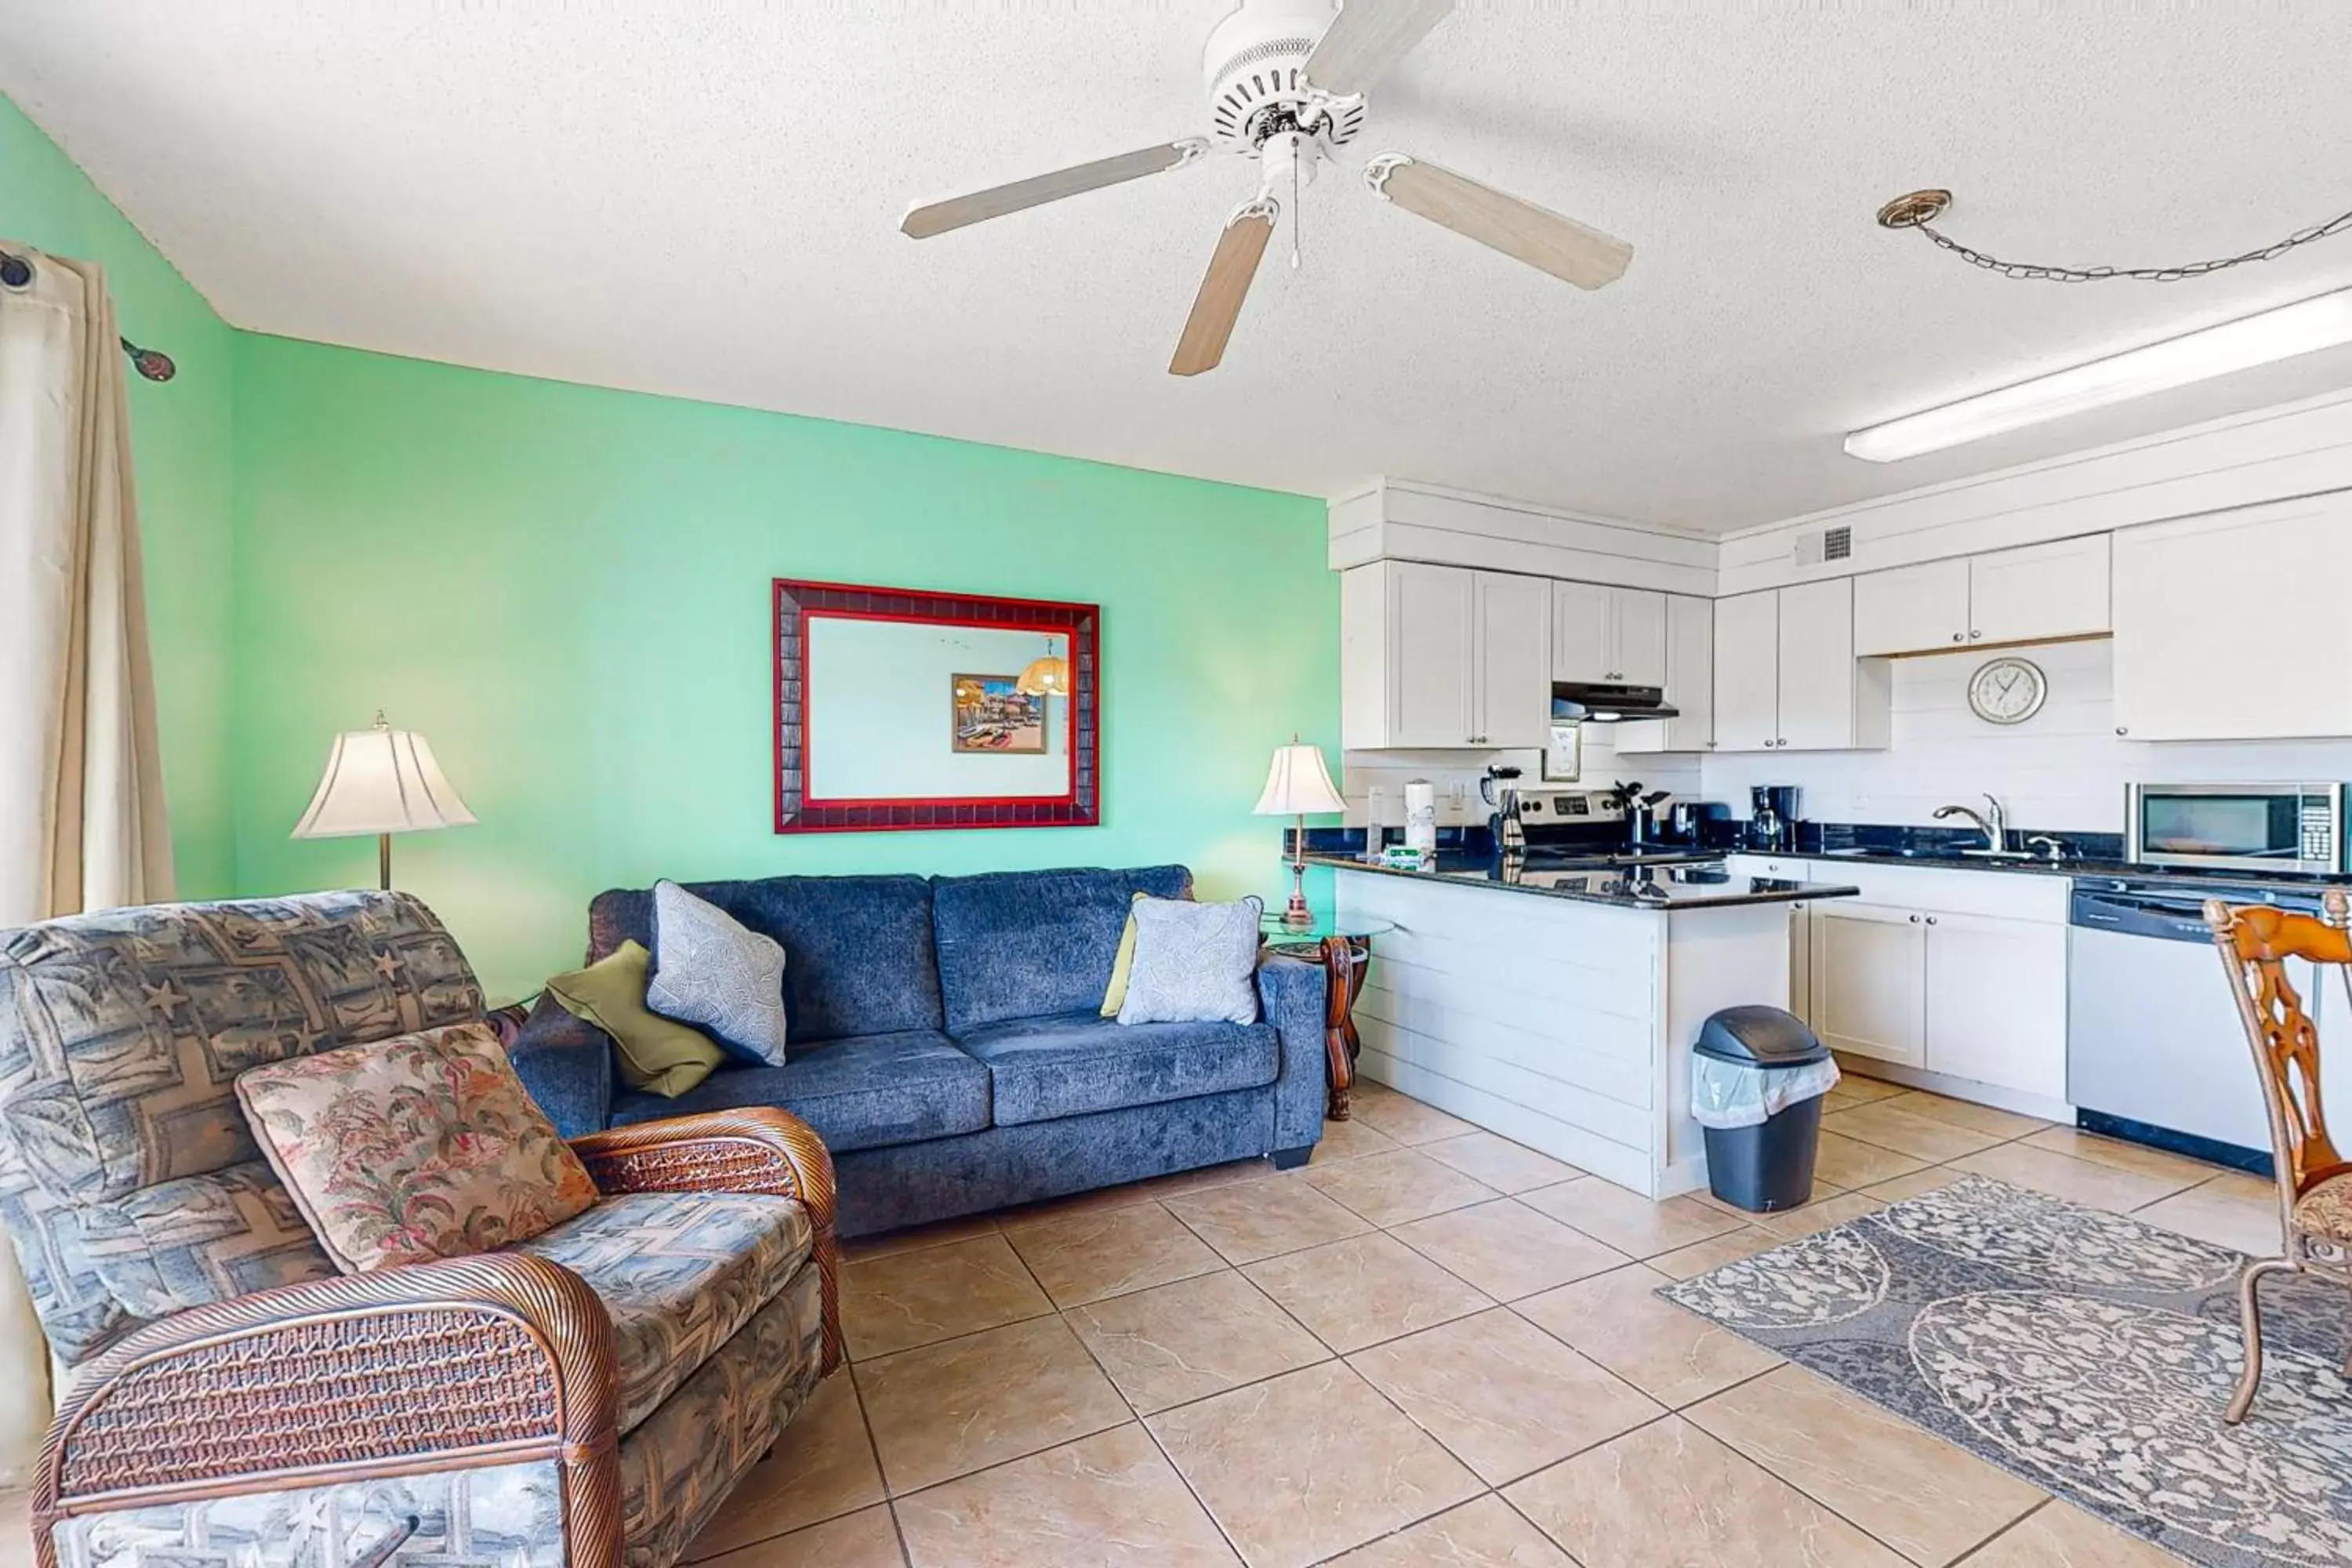 One Bedroom Apartment in Seaside Beach and Racquet Club Condos II